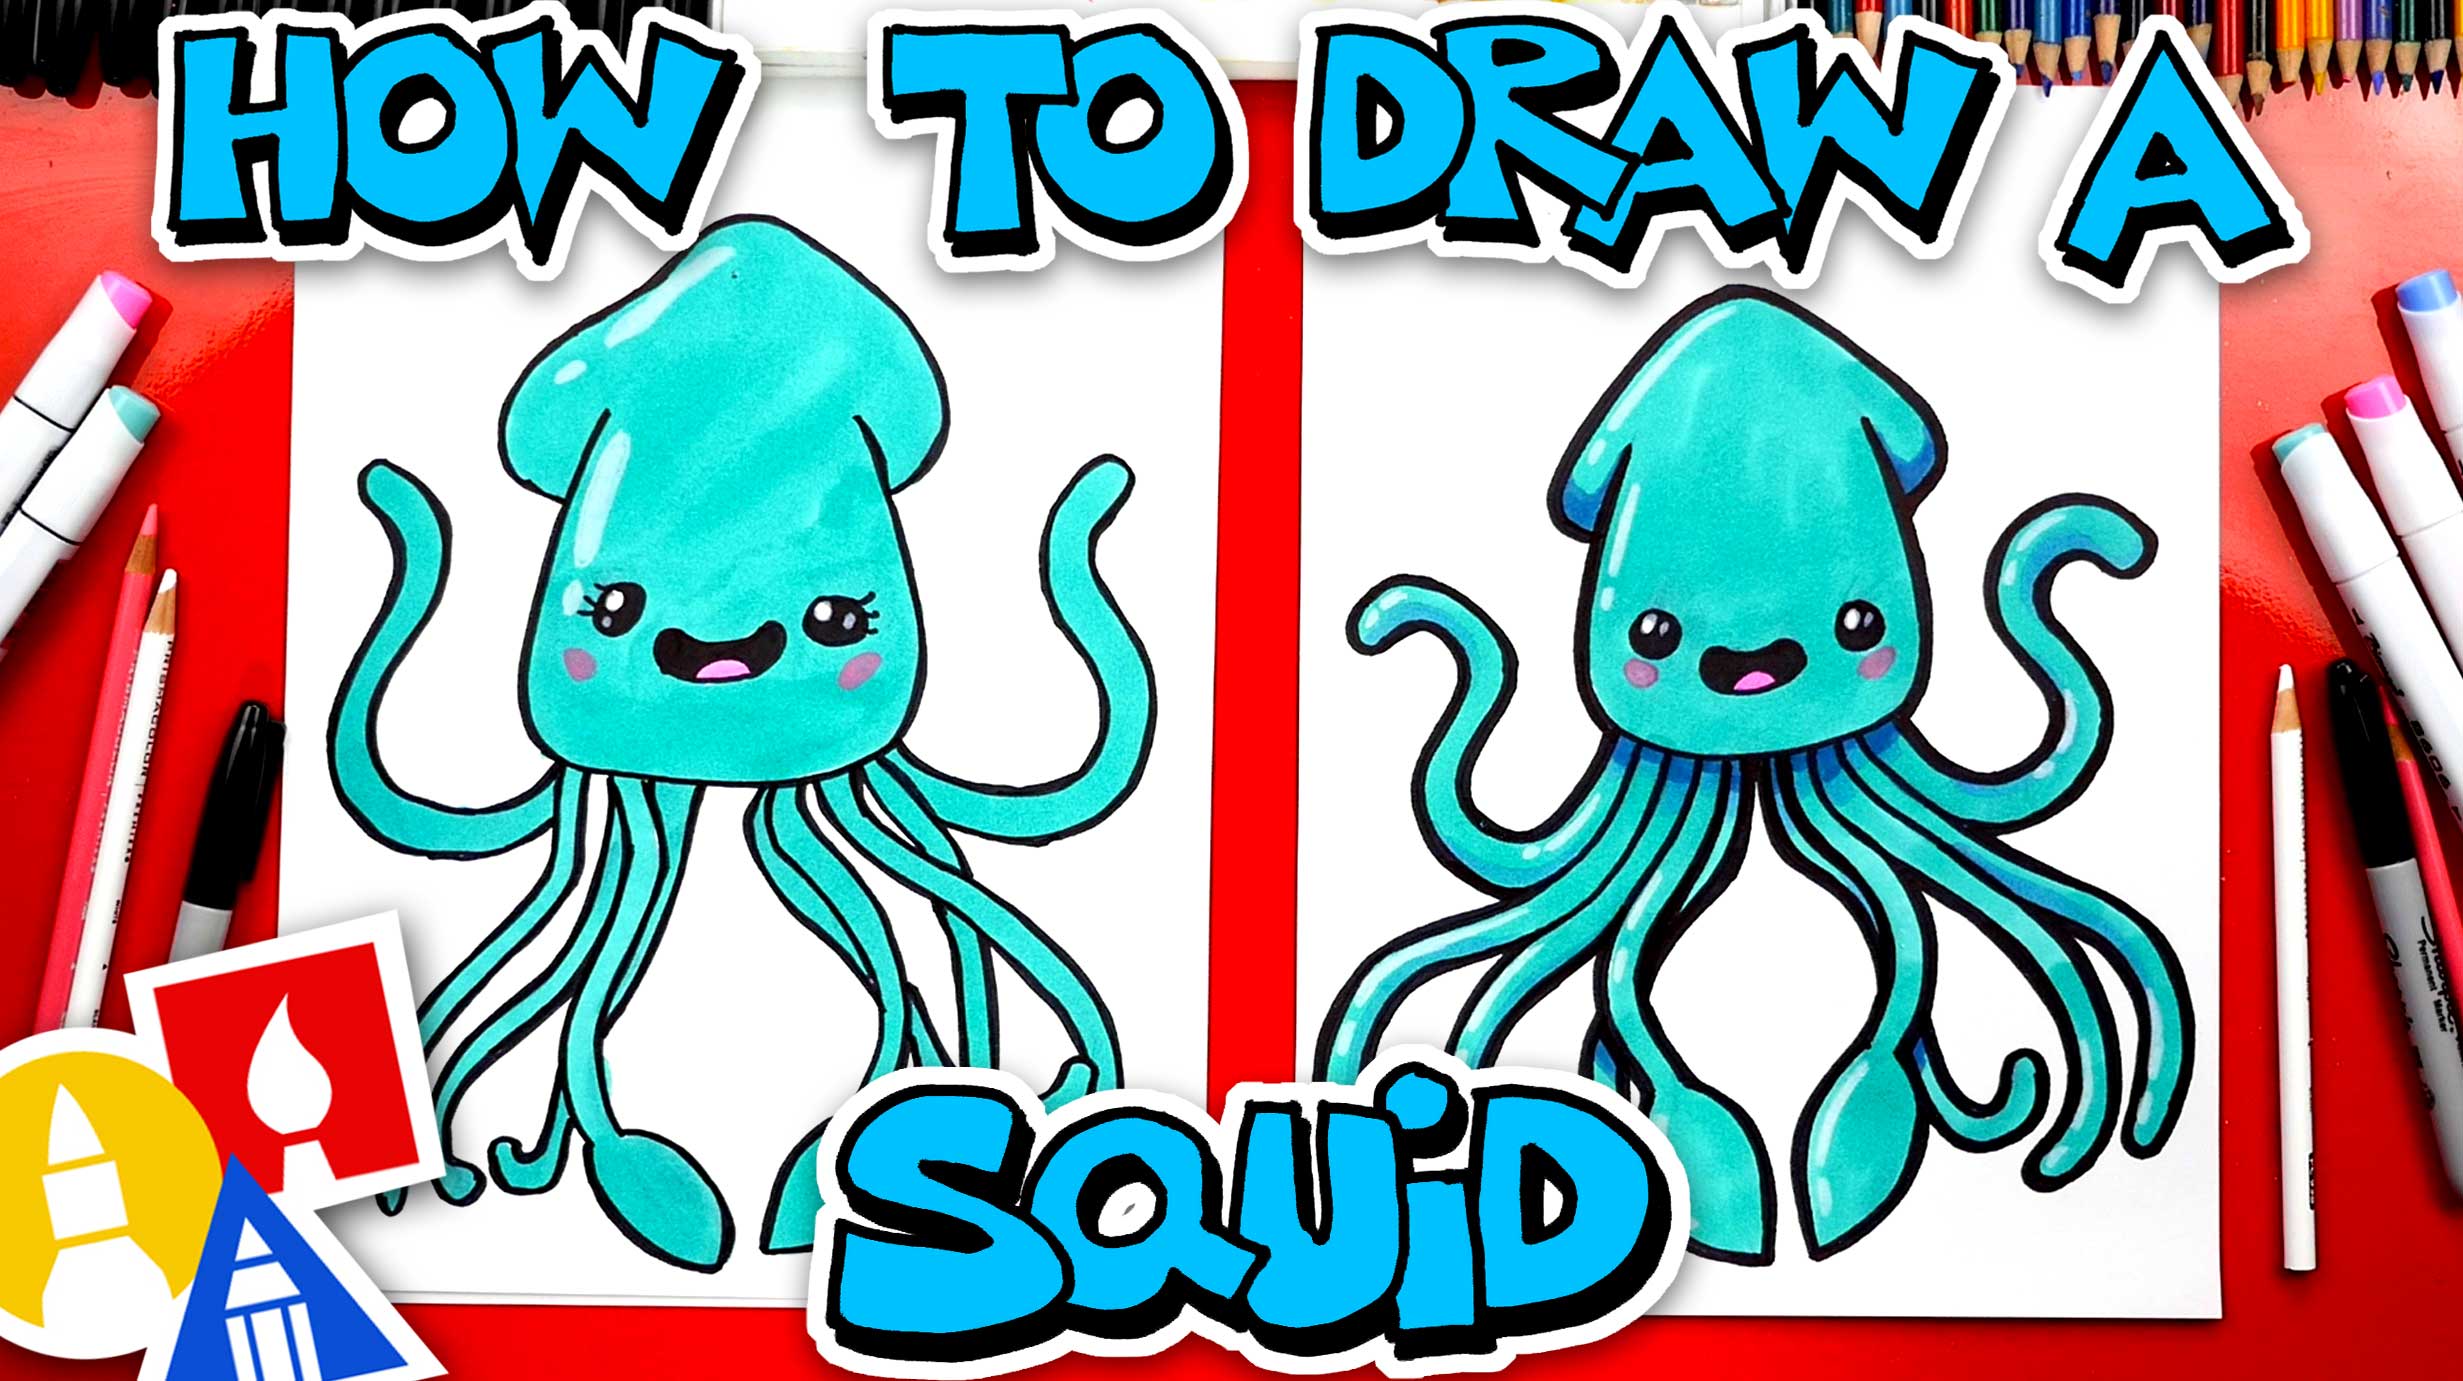 How To Draw A Funny Cartoon Squid - Art For Kids Hub